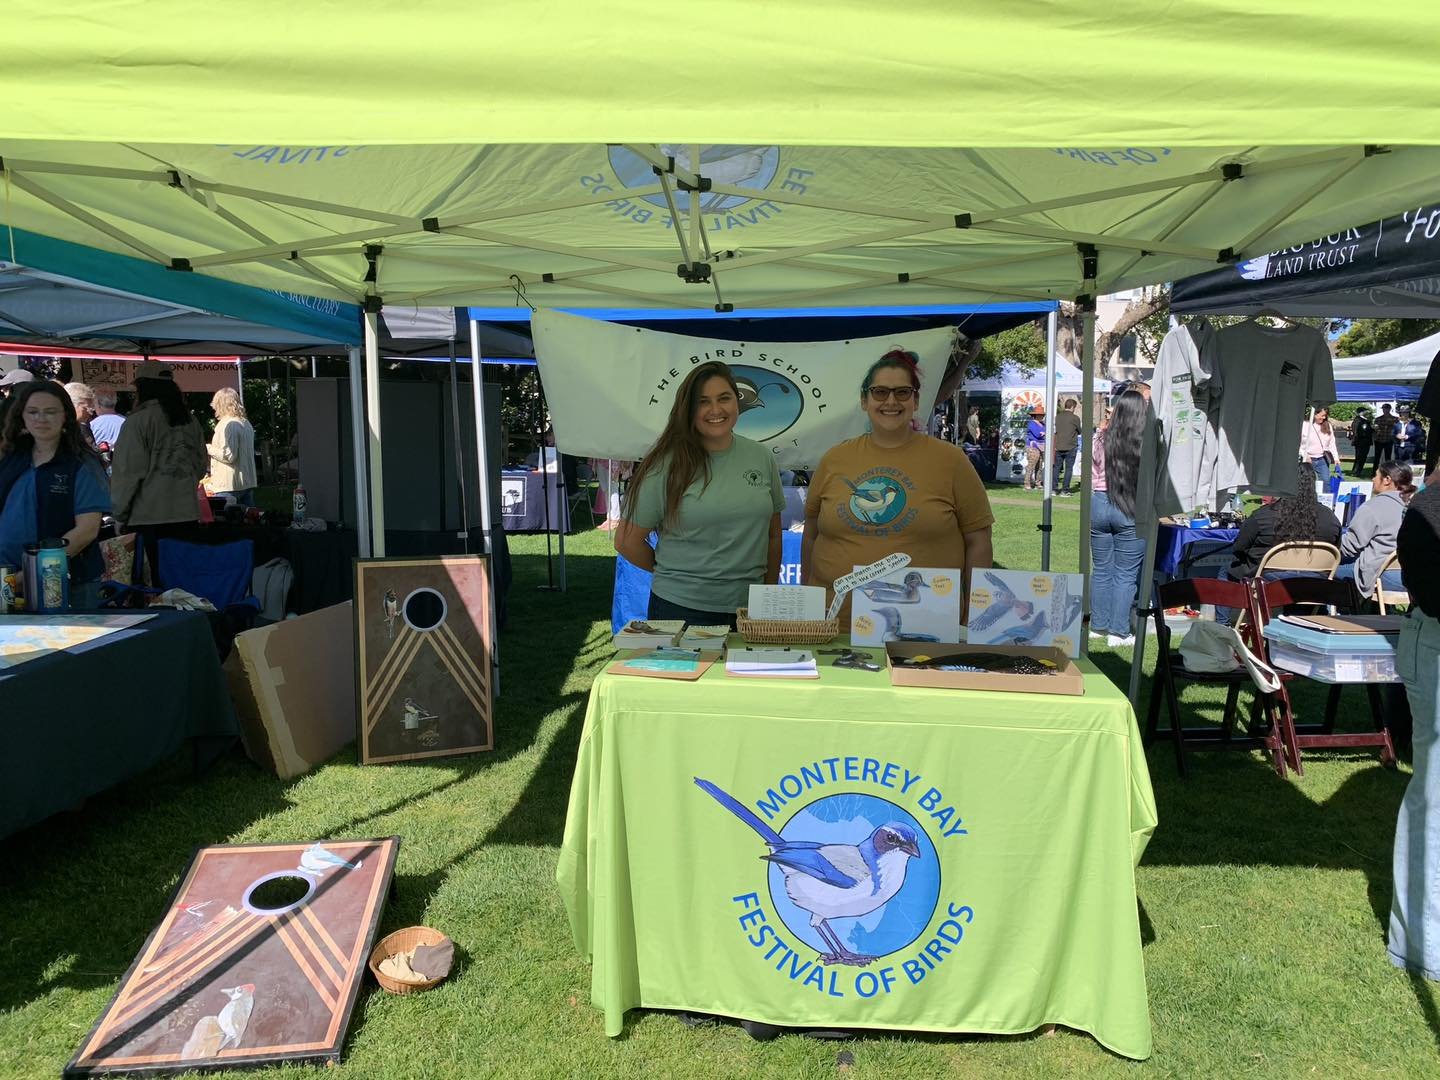 Bird School Project instructors had a great time earlier this month at the Carmel-by-the-Sea and Watsonville Earth Day events! Thanks to all those who came out and said hello, asked questions, and tried to match the wings! 
#EarthDay #earthdaycelebra